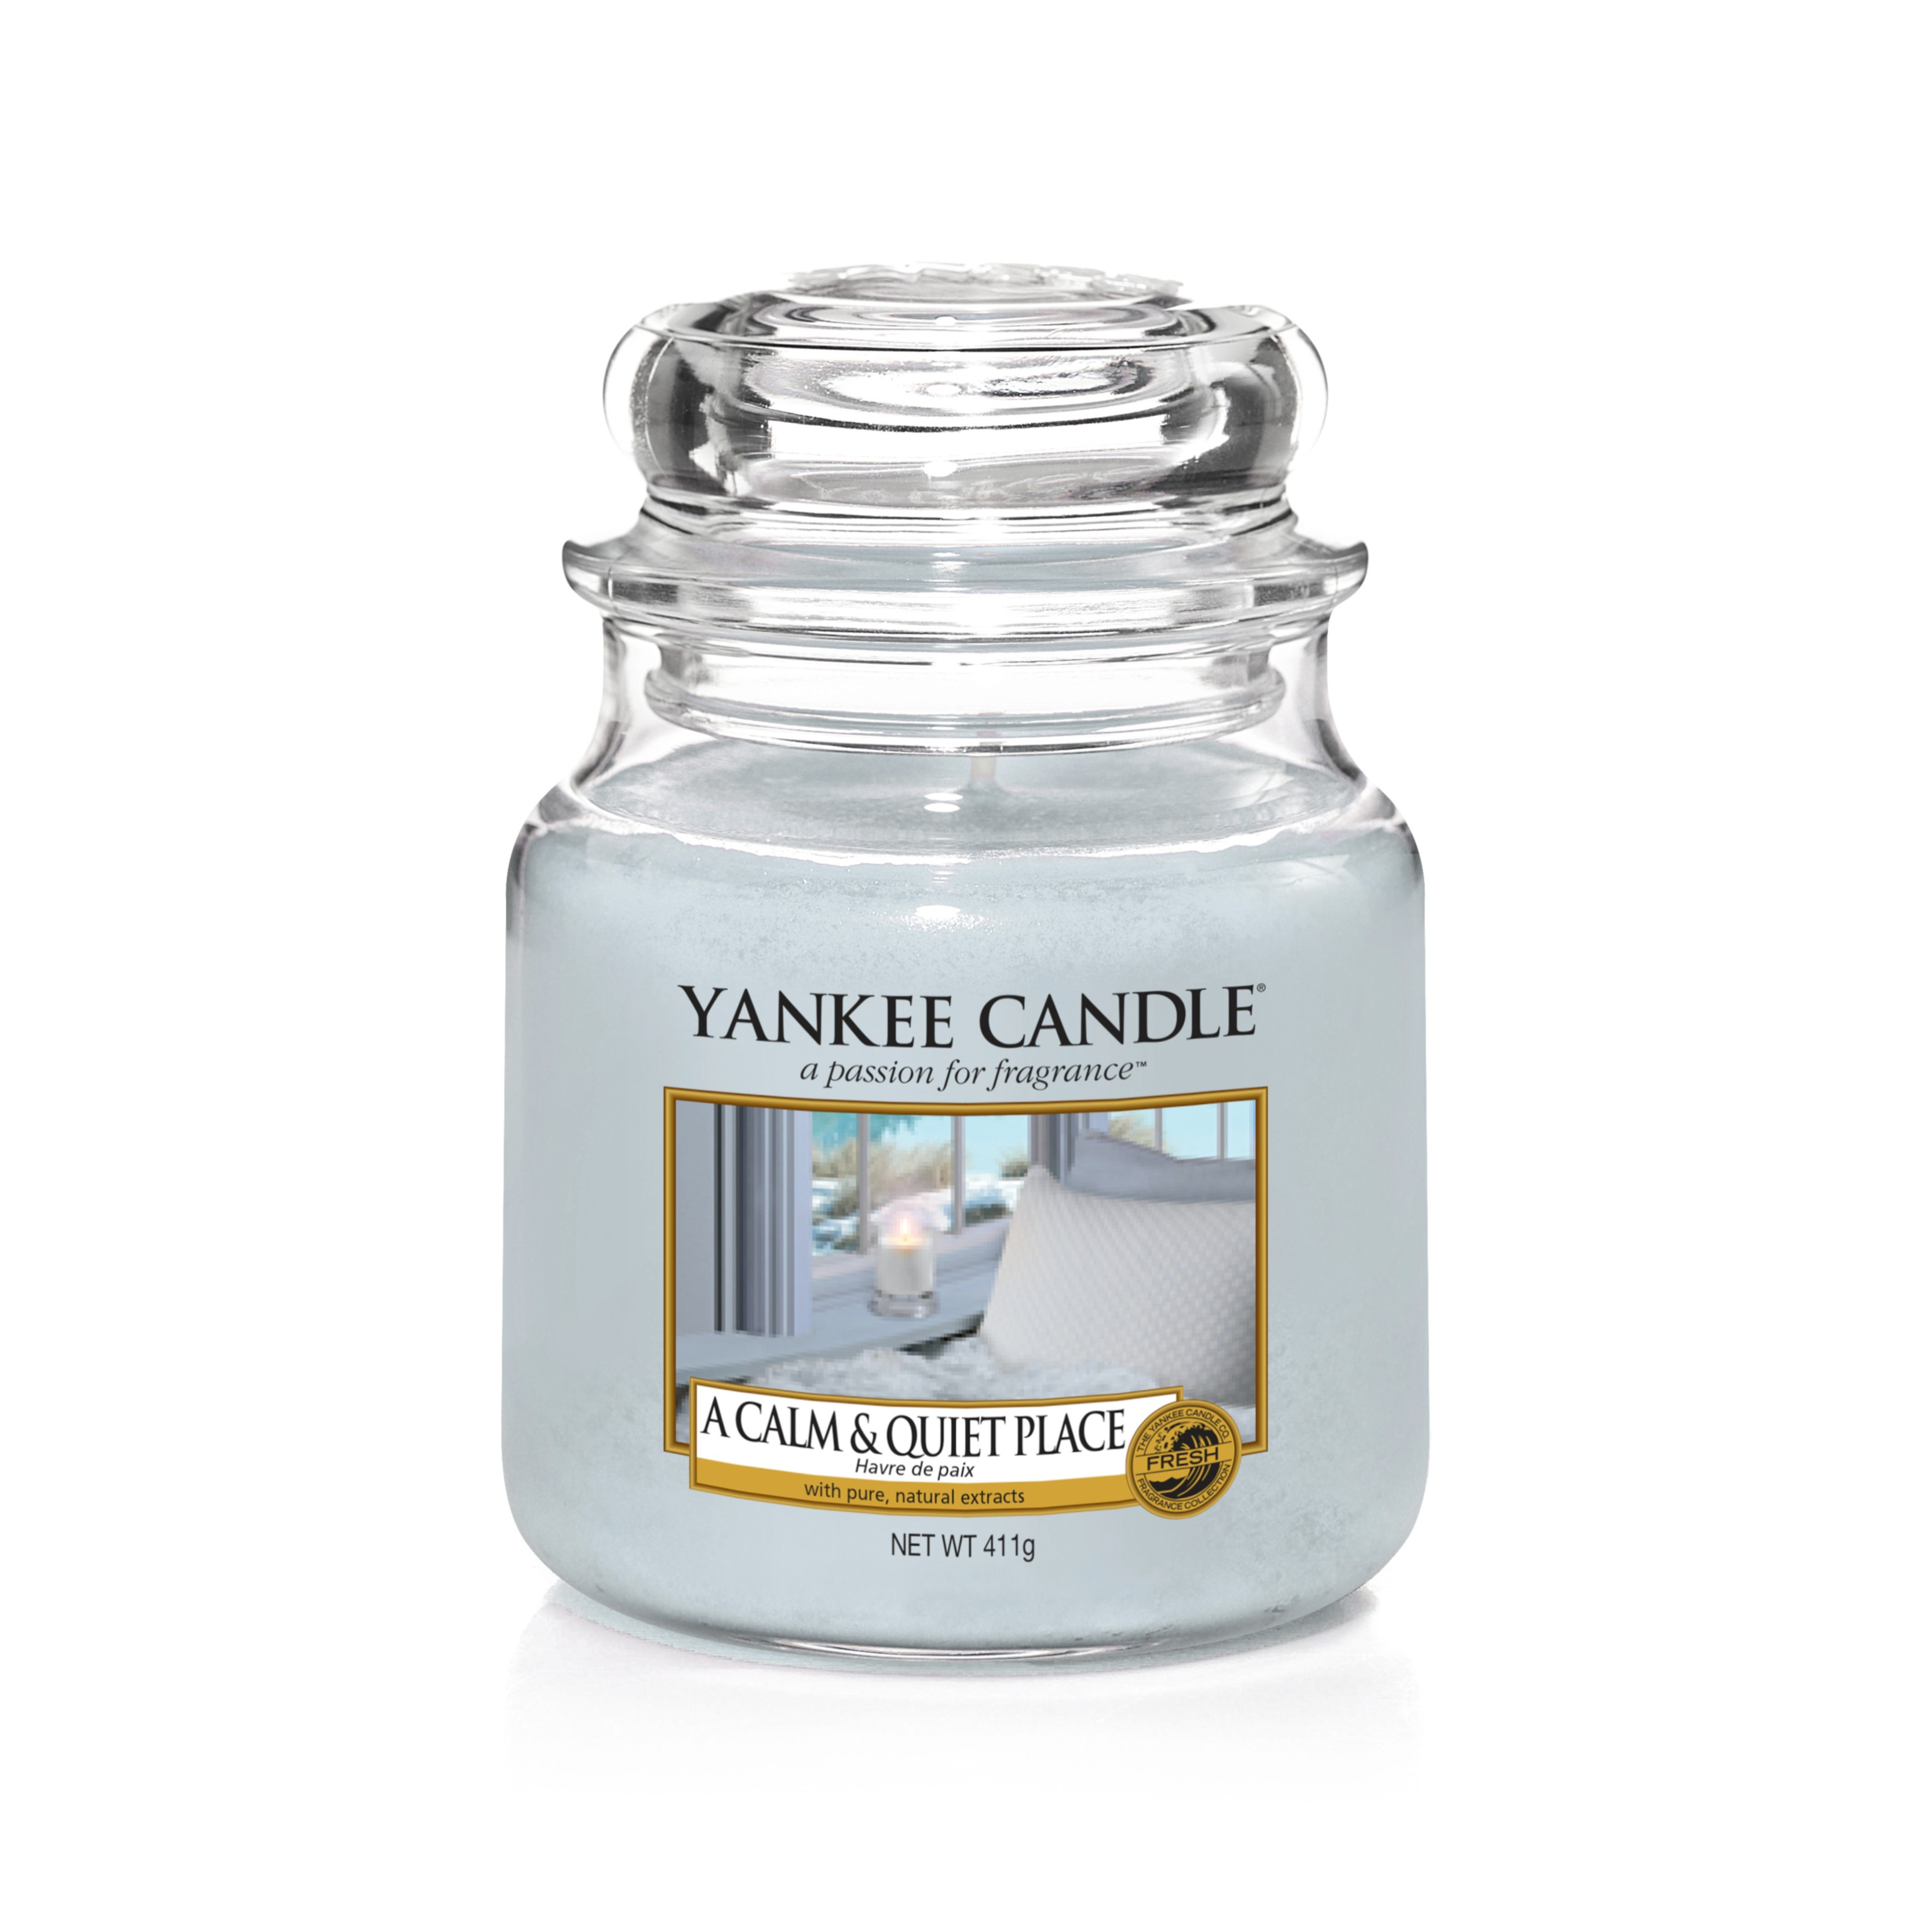 Image of Yankee Candle - (411g) Duft Kerze im Glas Medium Jar (10.00114.0841) - A Calm & Quiet Place bei Apfelkiste.ch